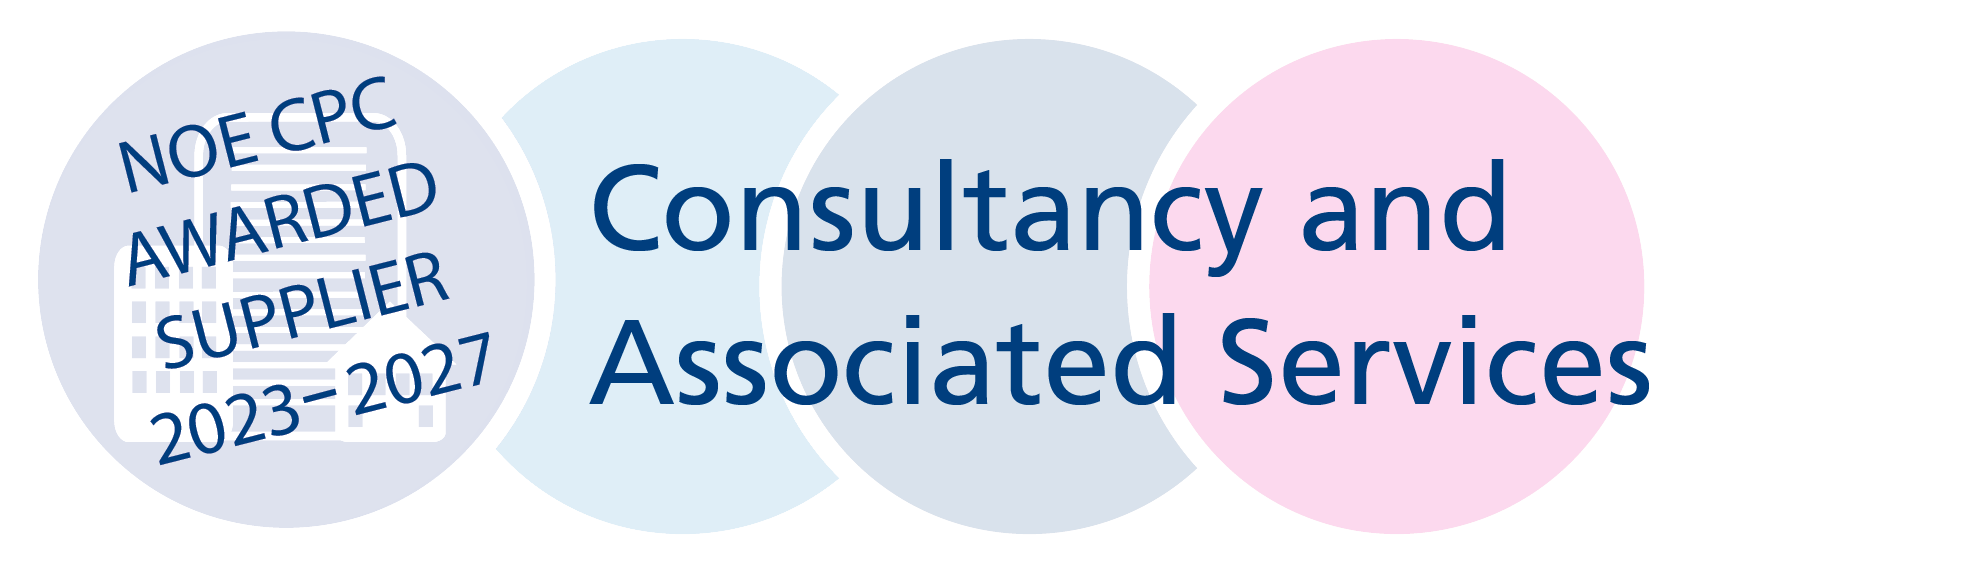 NHS Awarded Supplier Logo Consultancy